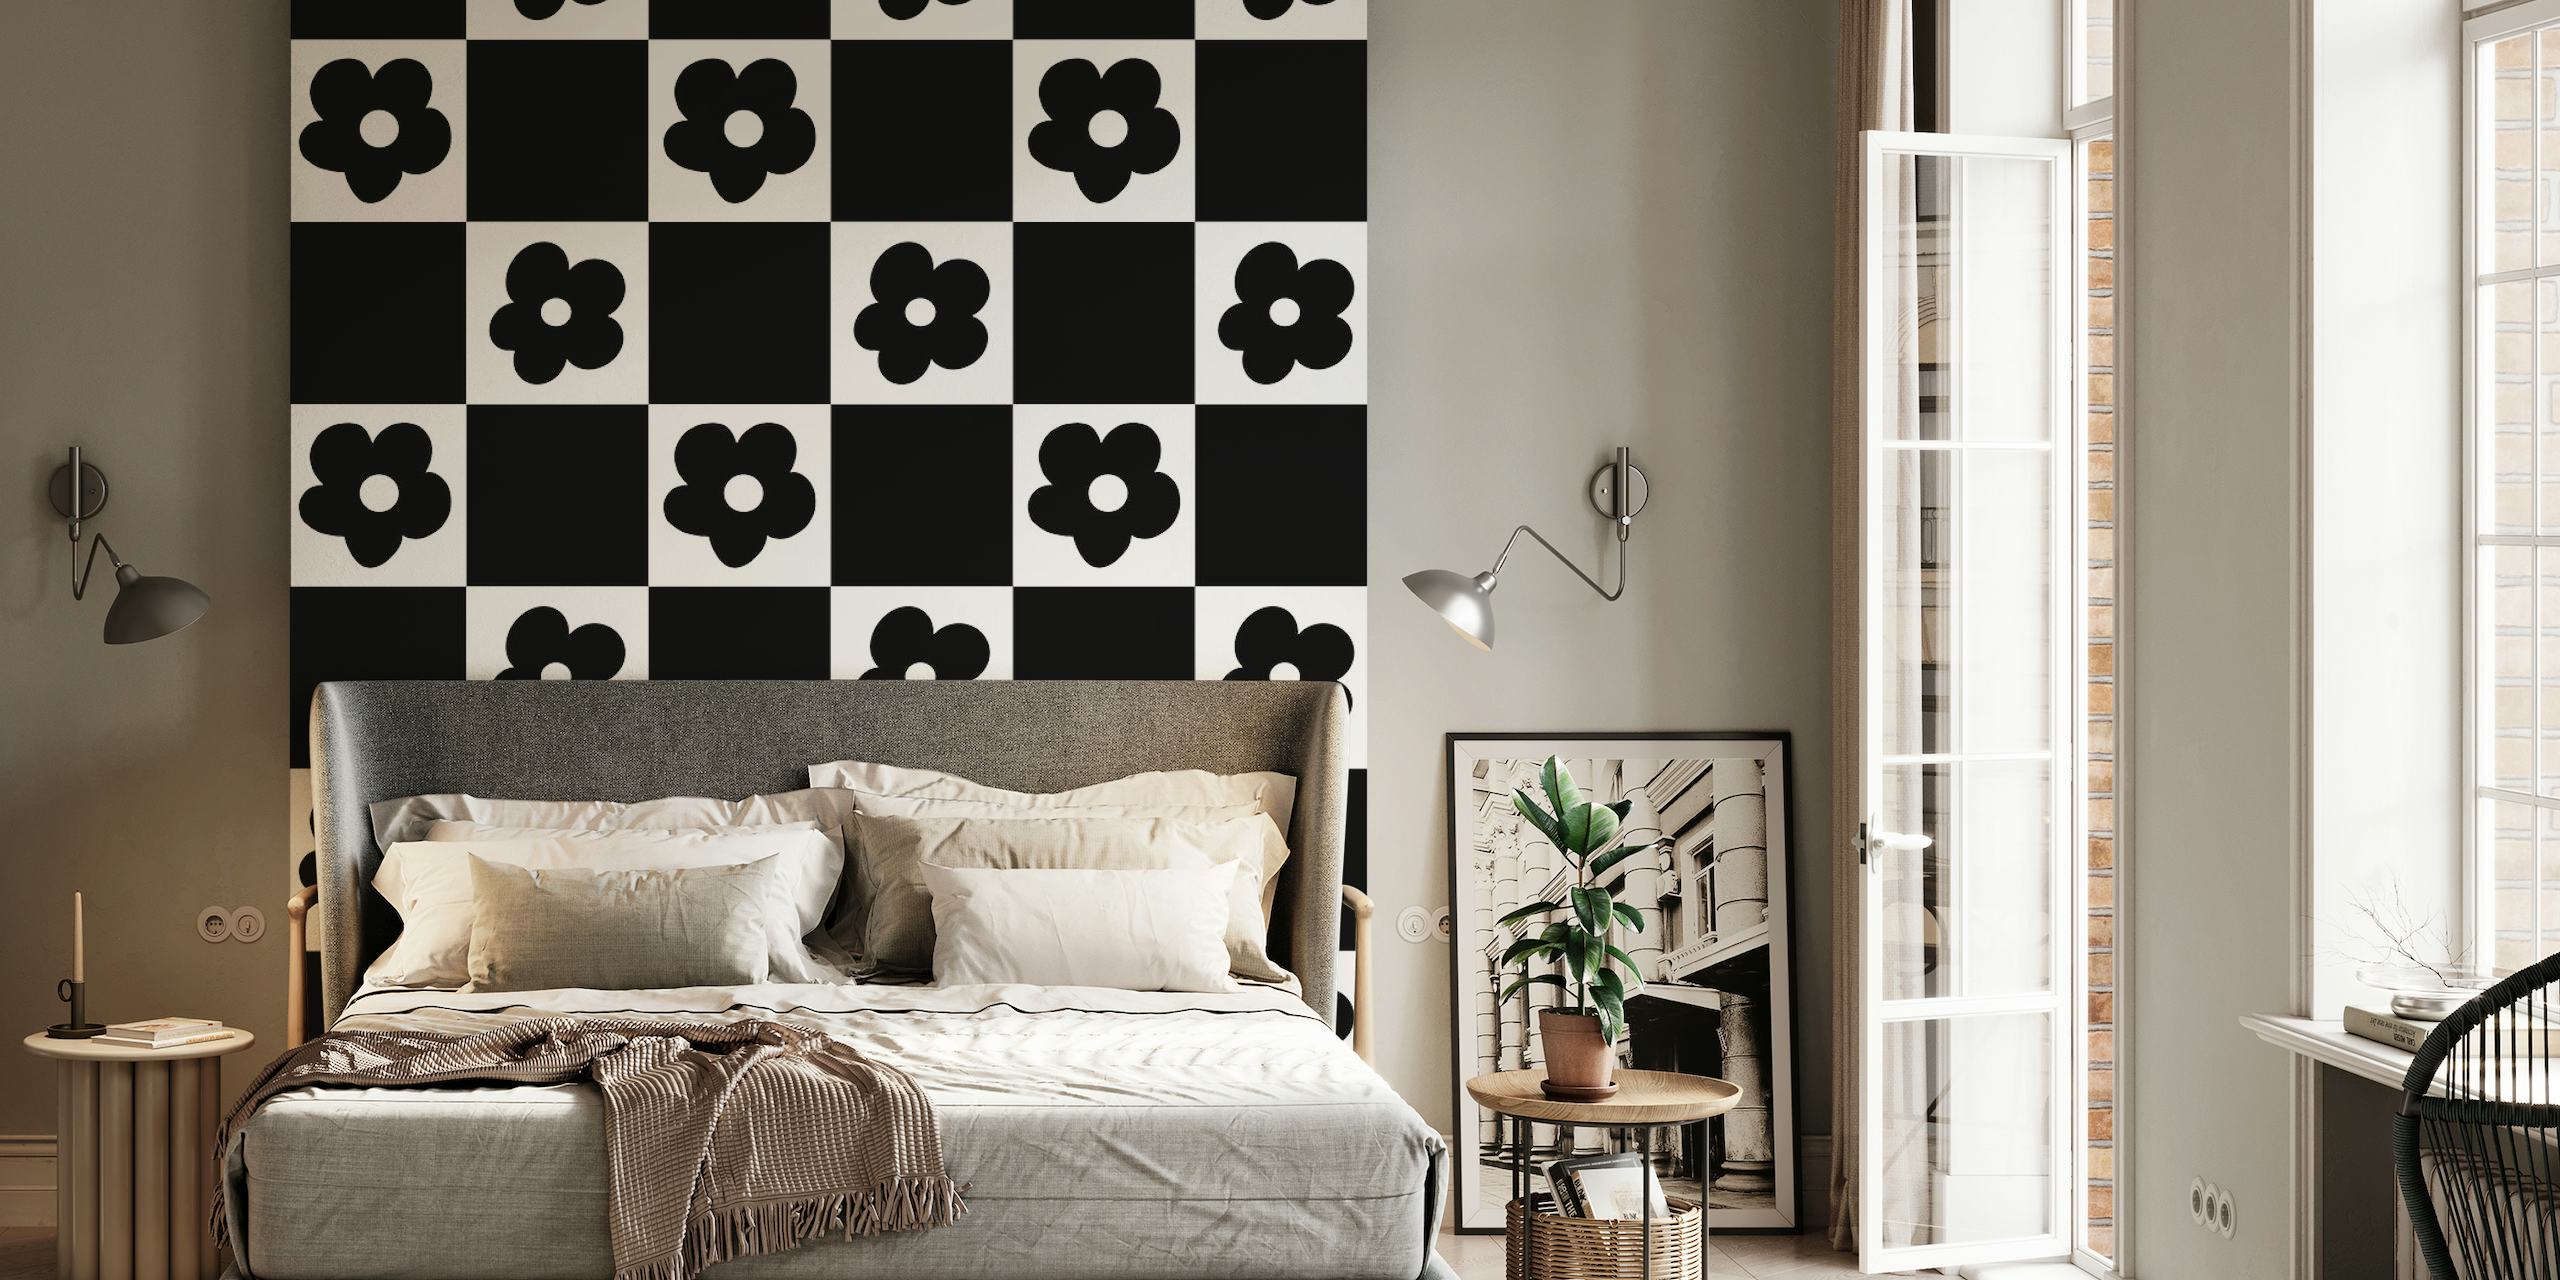 Black and white checkered pattern with floral design wall mural